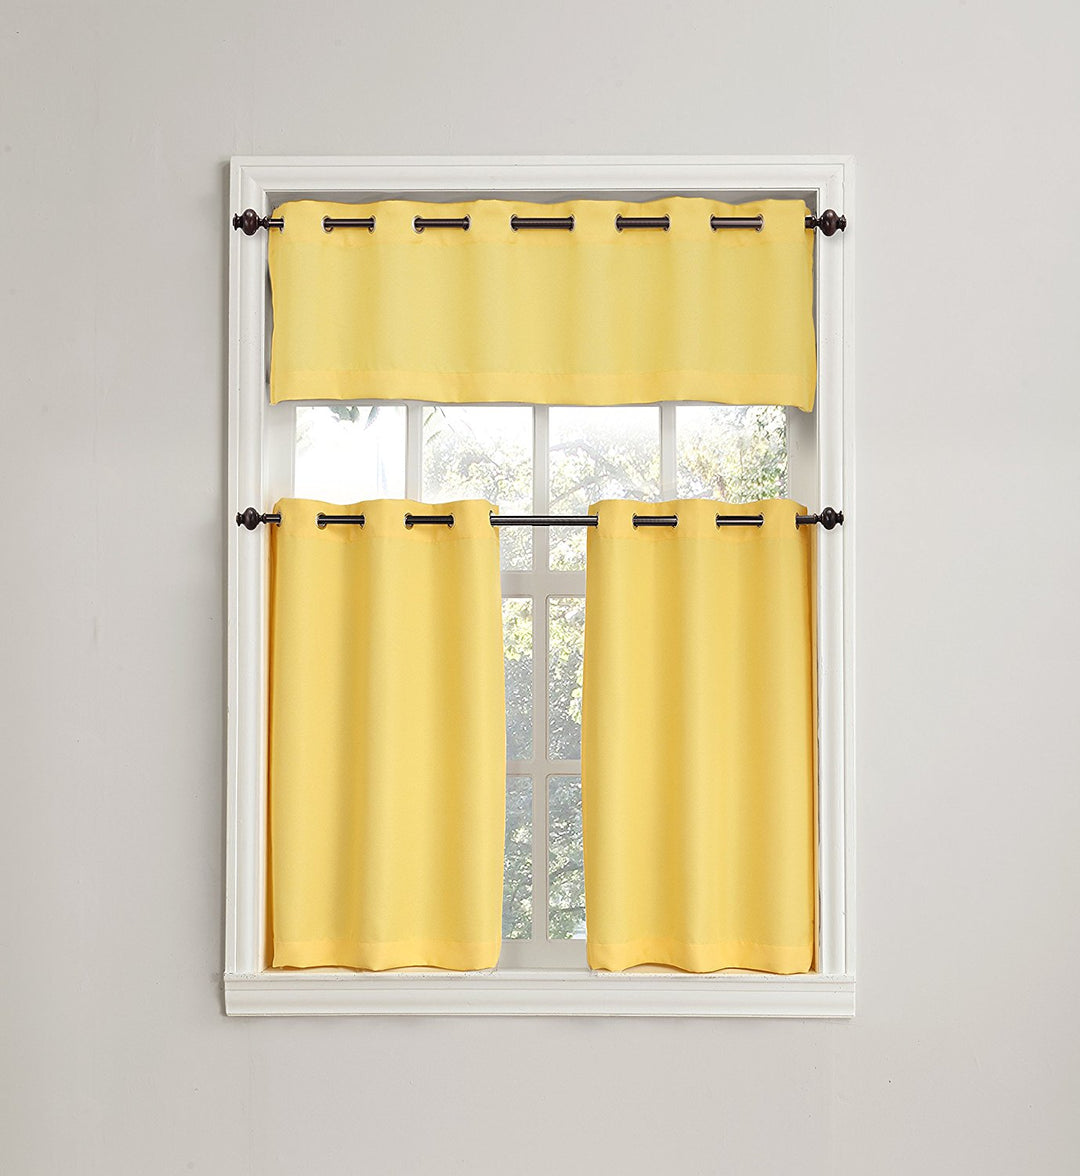 No. 918 Montego Casual Textured Grommet Kitchen Curtain Valance, 56 x 14 Inch , Yellow